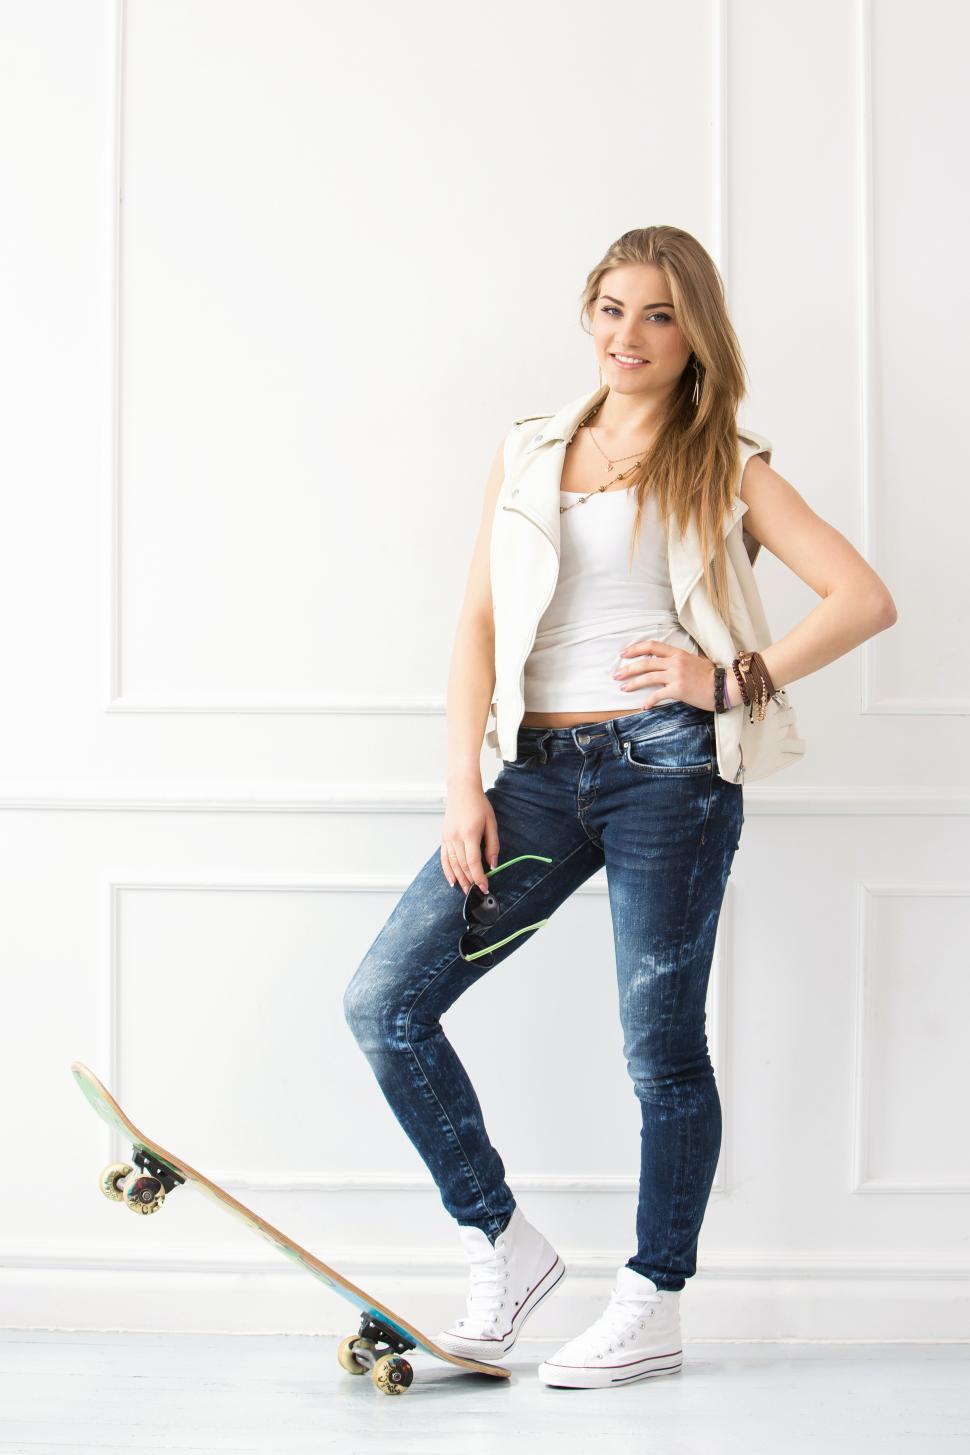 Free Image of Standing woman with skateboard 